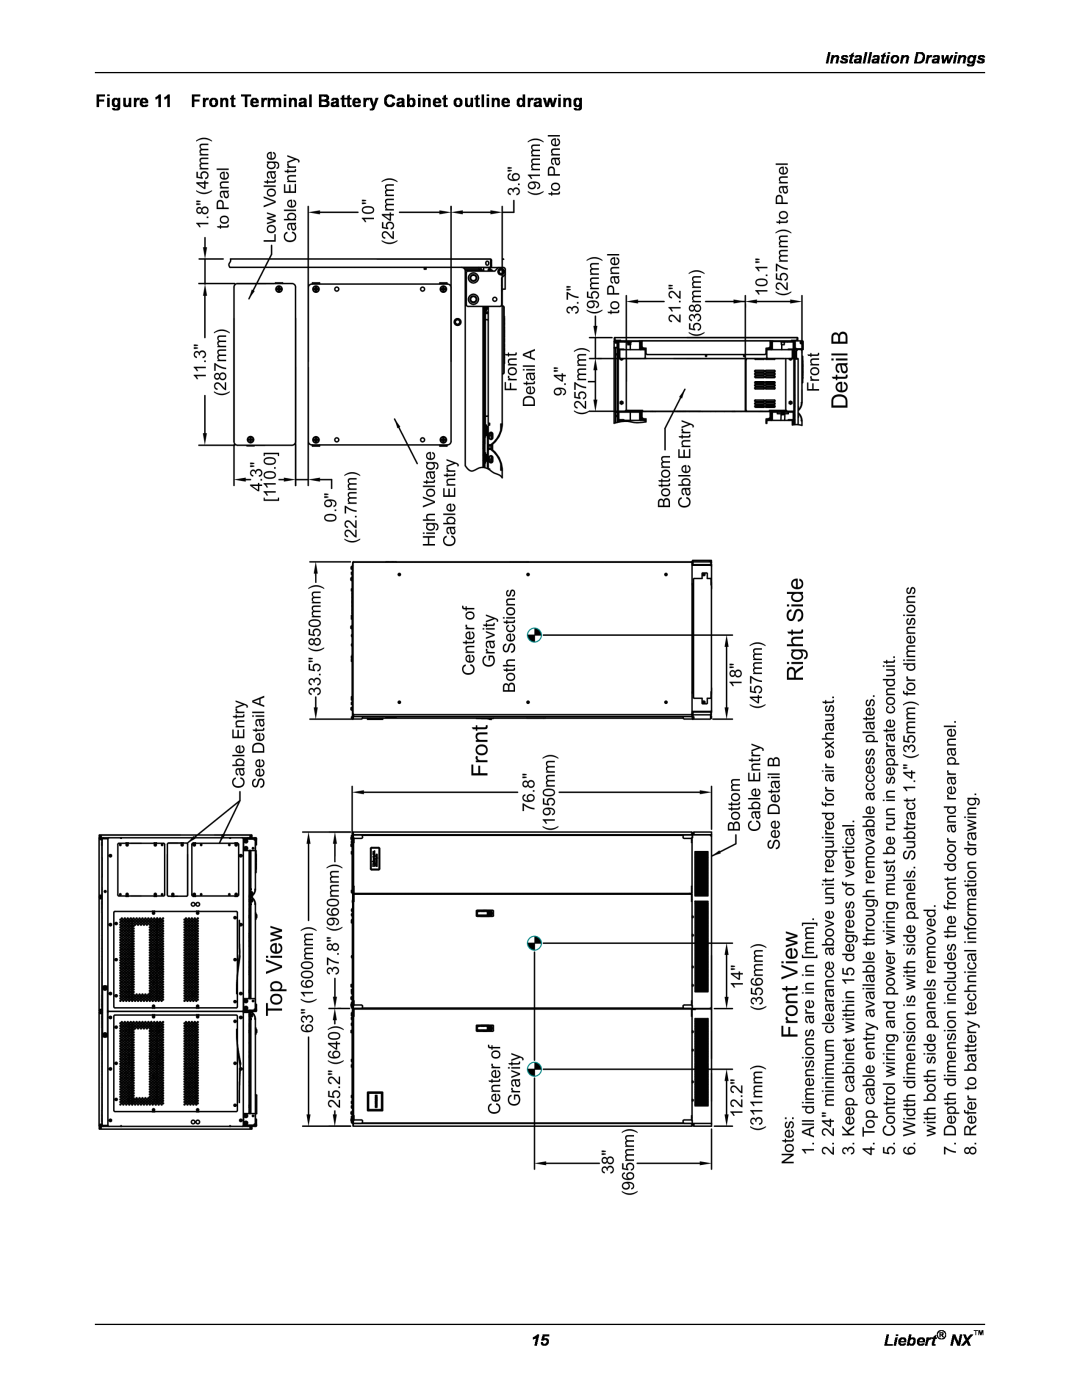 Emerson 225-600KVA installation manual Top View, Front View, Right Side, Detail B 